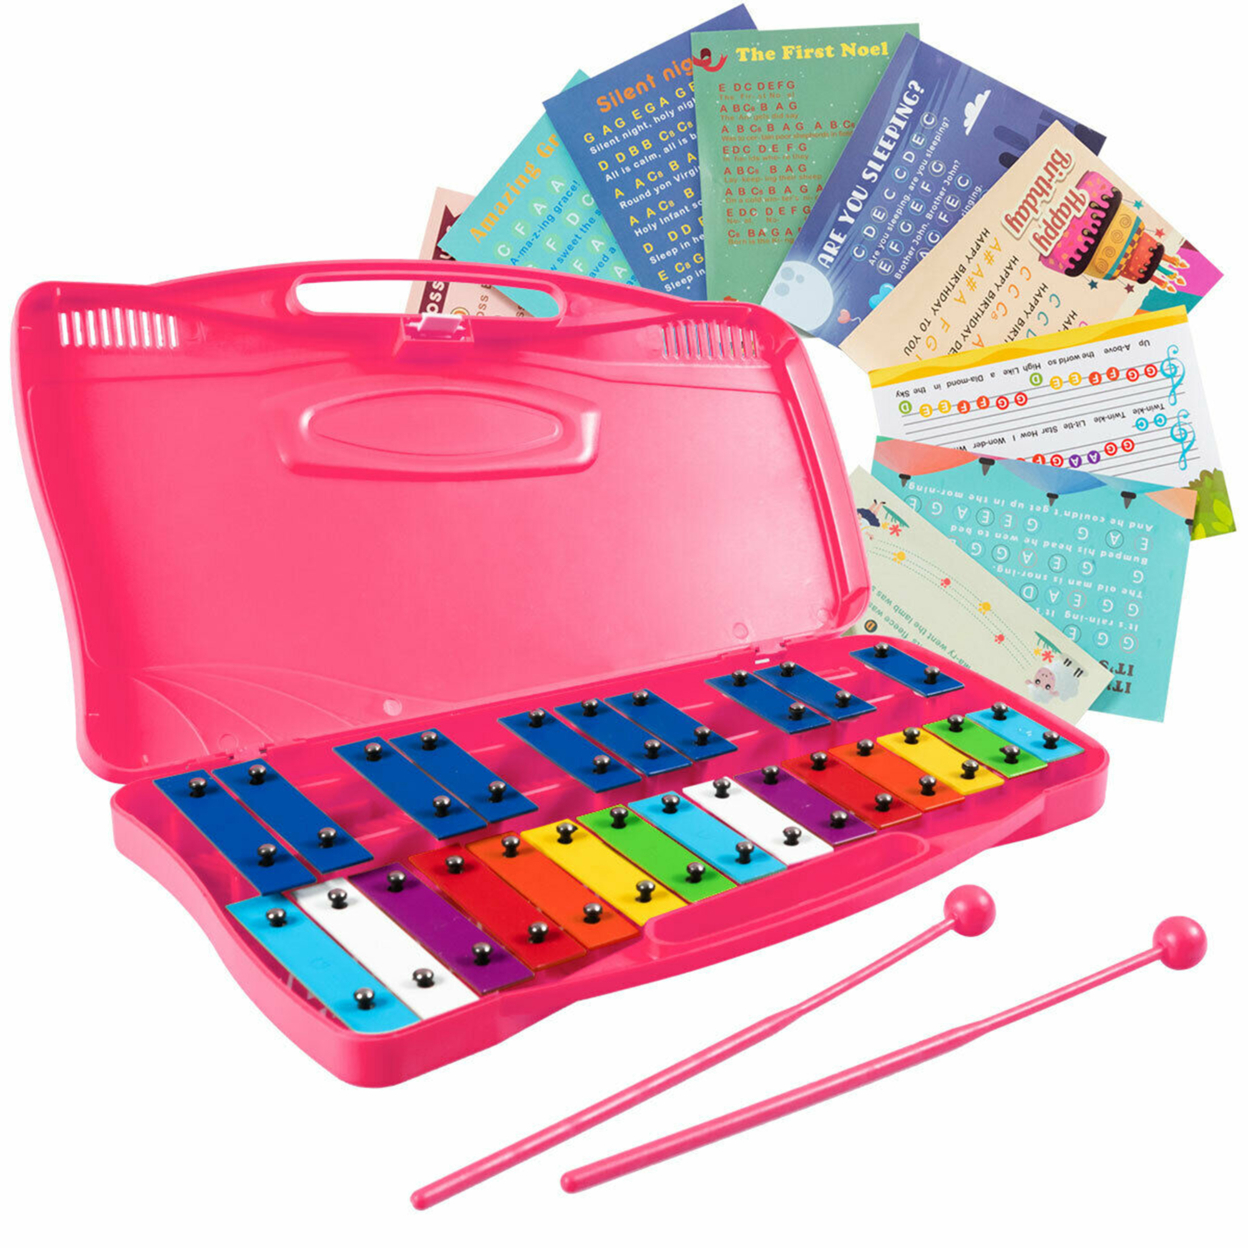 25 Notes Kids Glockenspiel Chromatic Metal Xylophone W/ Pink Case And 2 Mallets